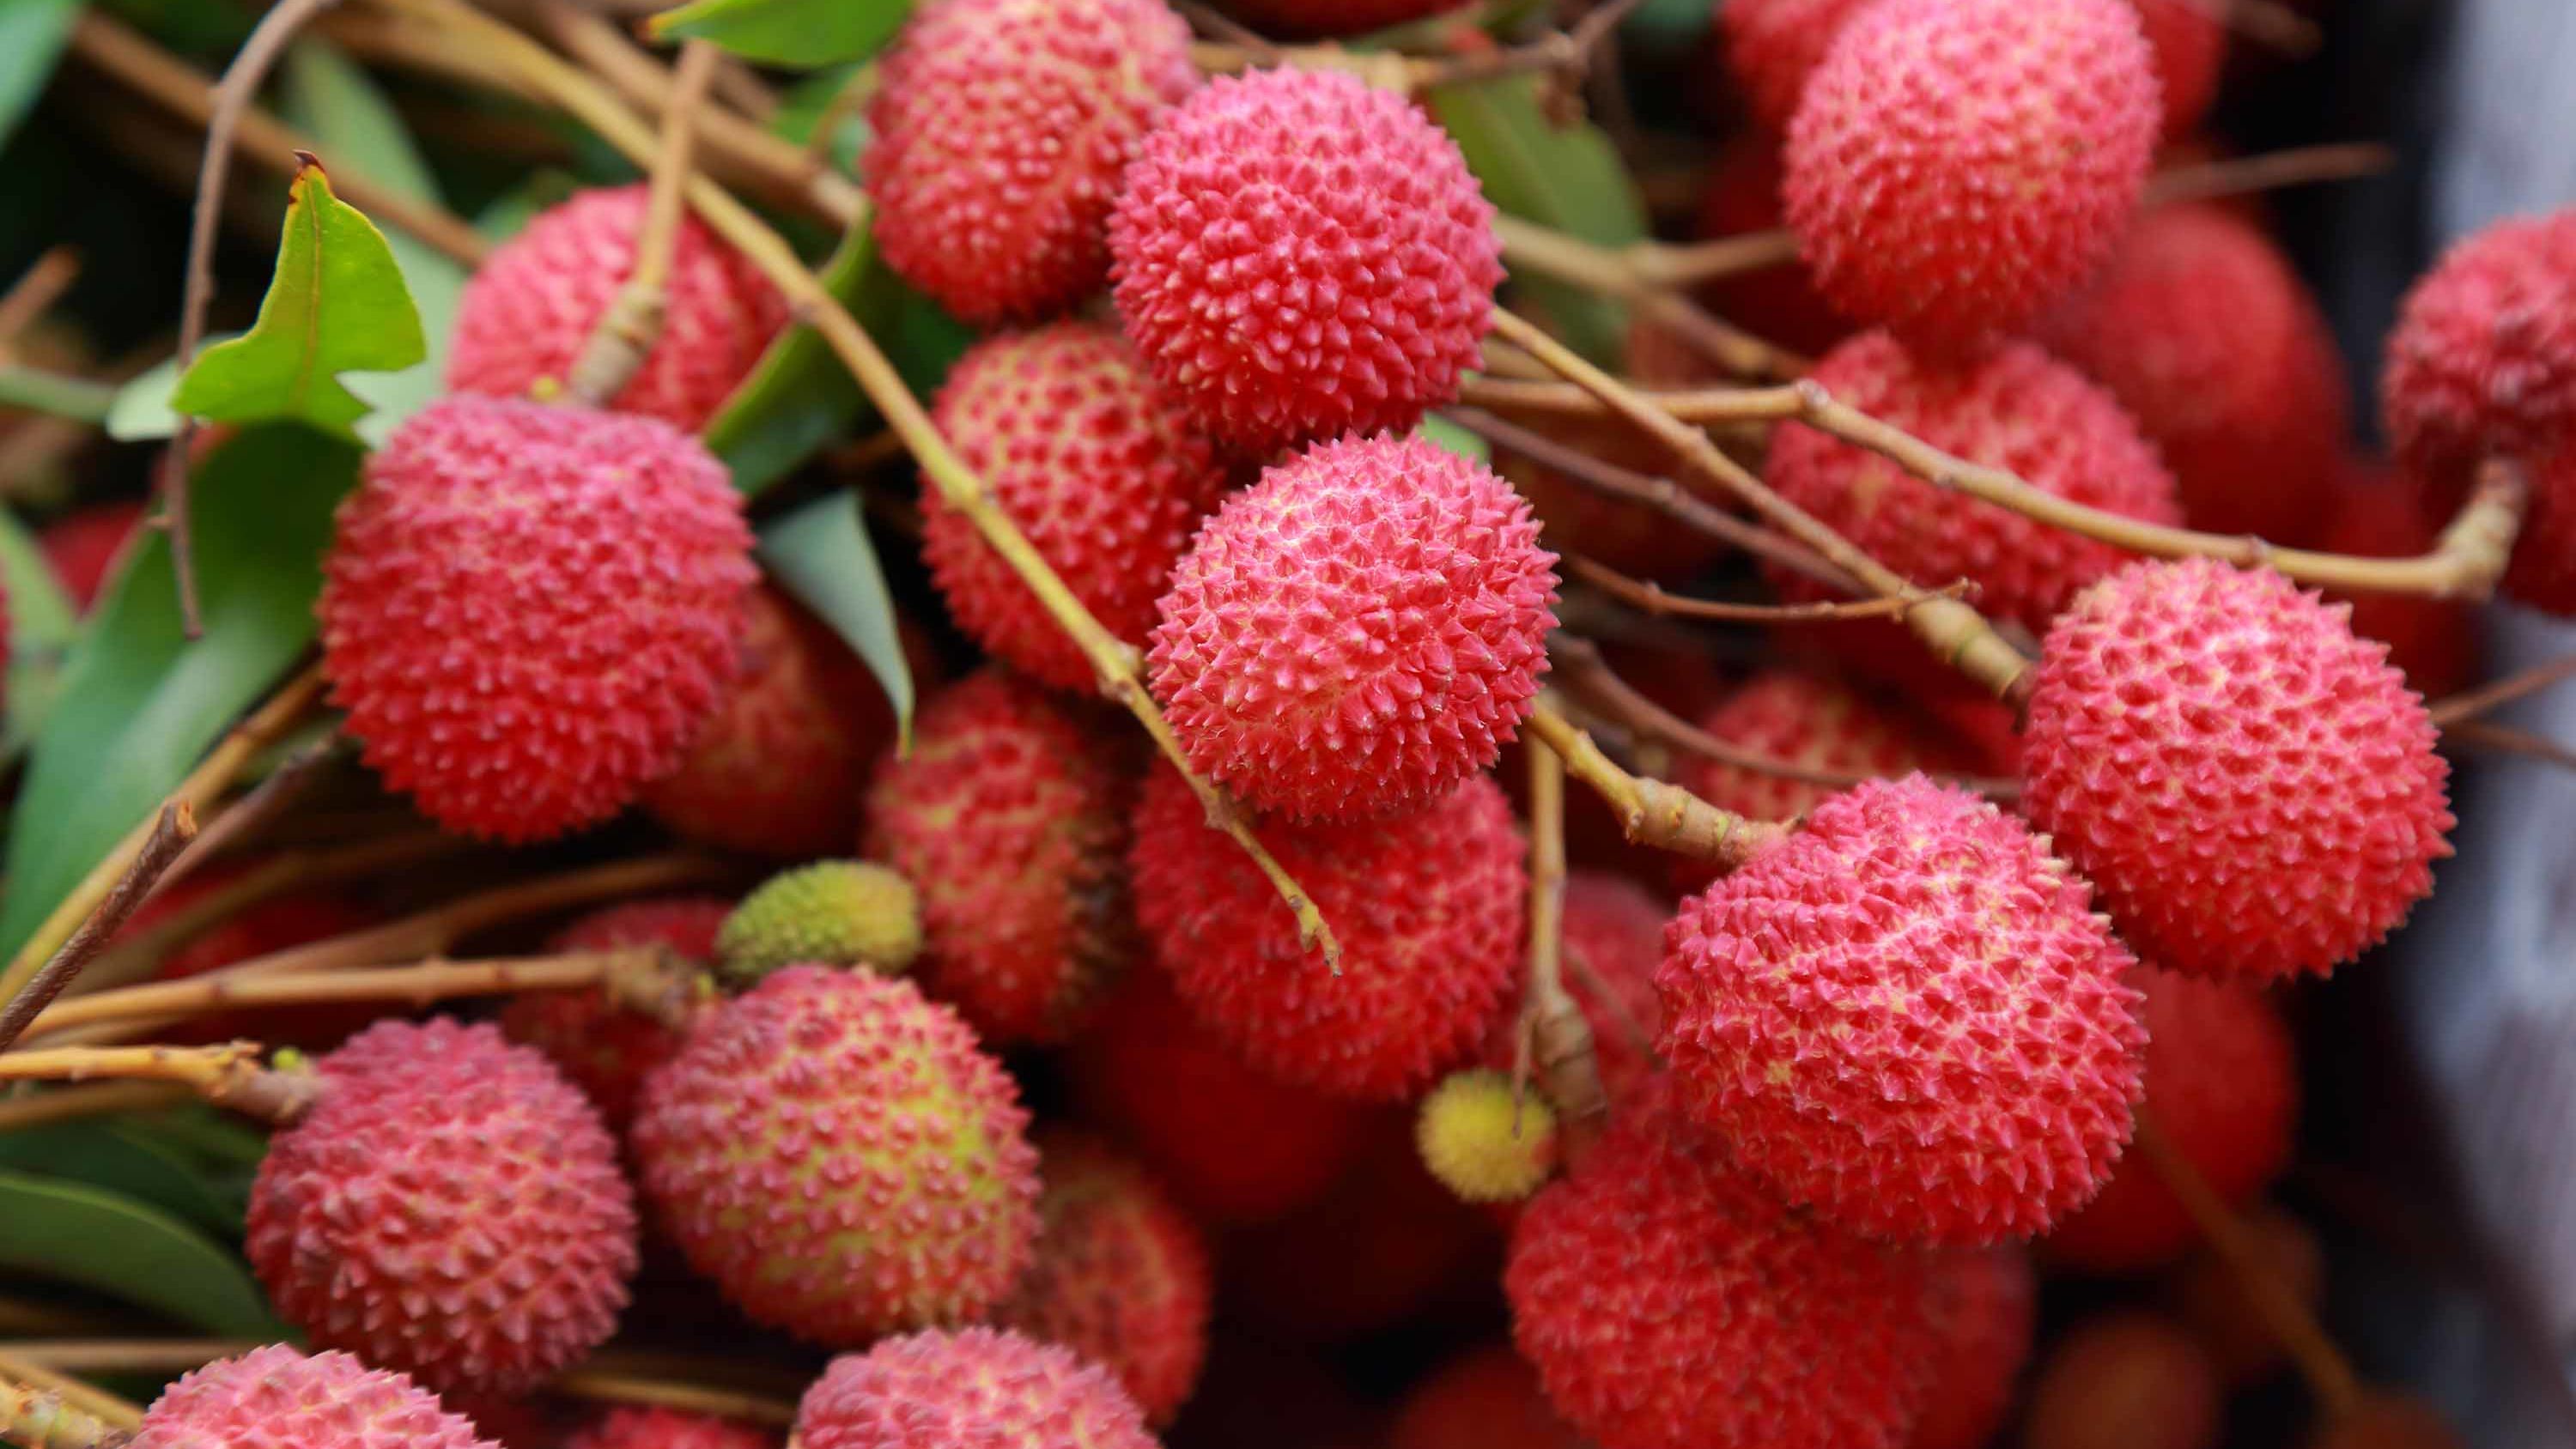 Research has found that consumption of lychee can be linked to encephalitis.